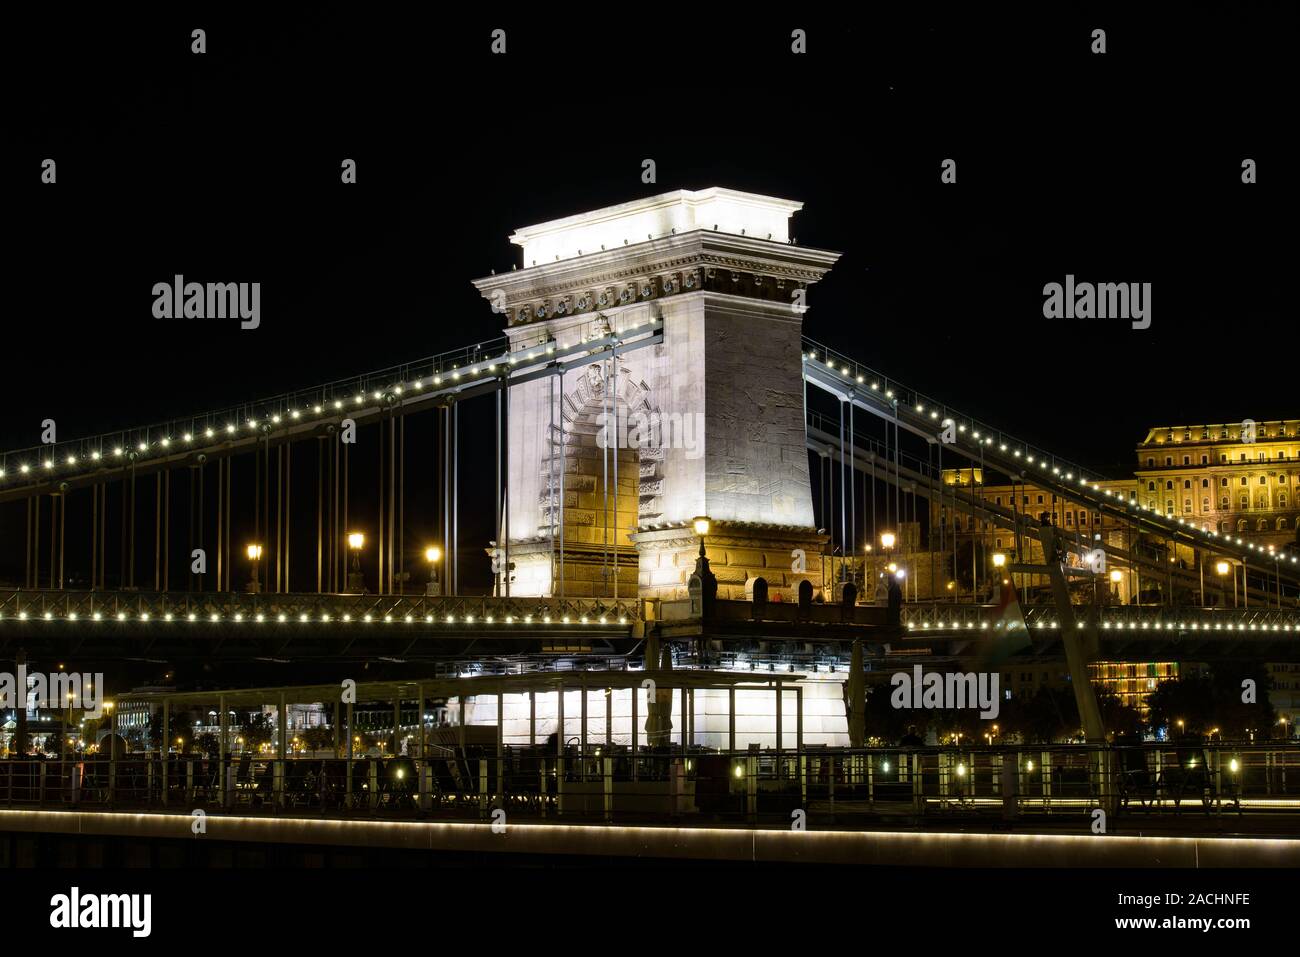 Night view of Széchenyi Chain Bridge across the River Danube connecting Buda and Pest, Budapest, Hungary Stock Photo